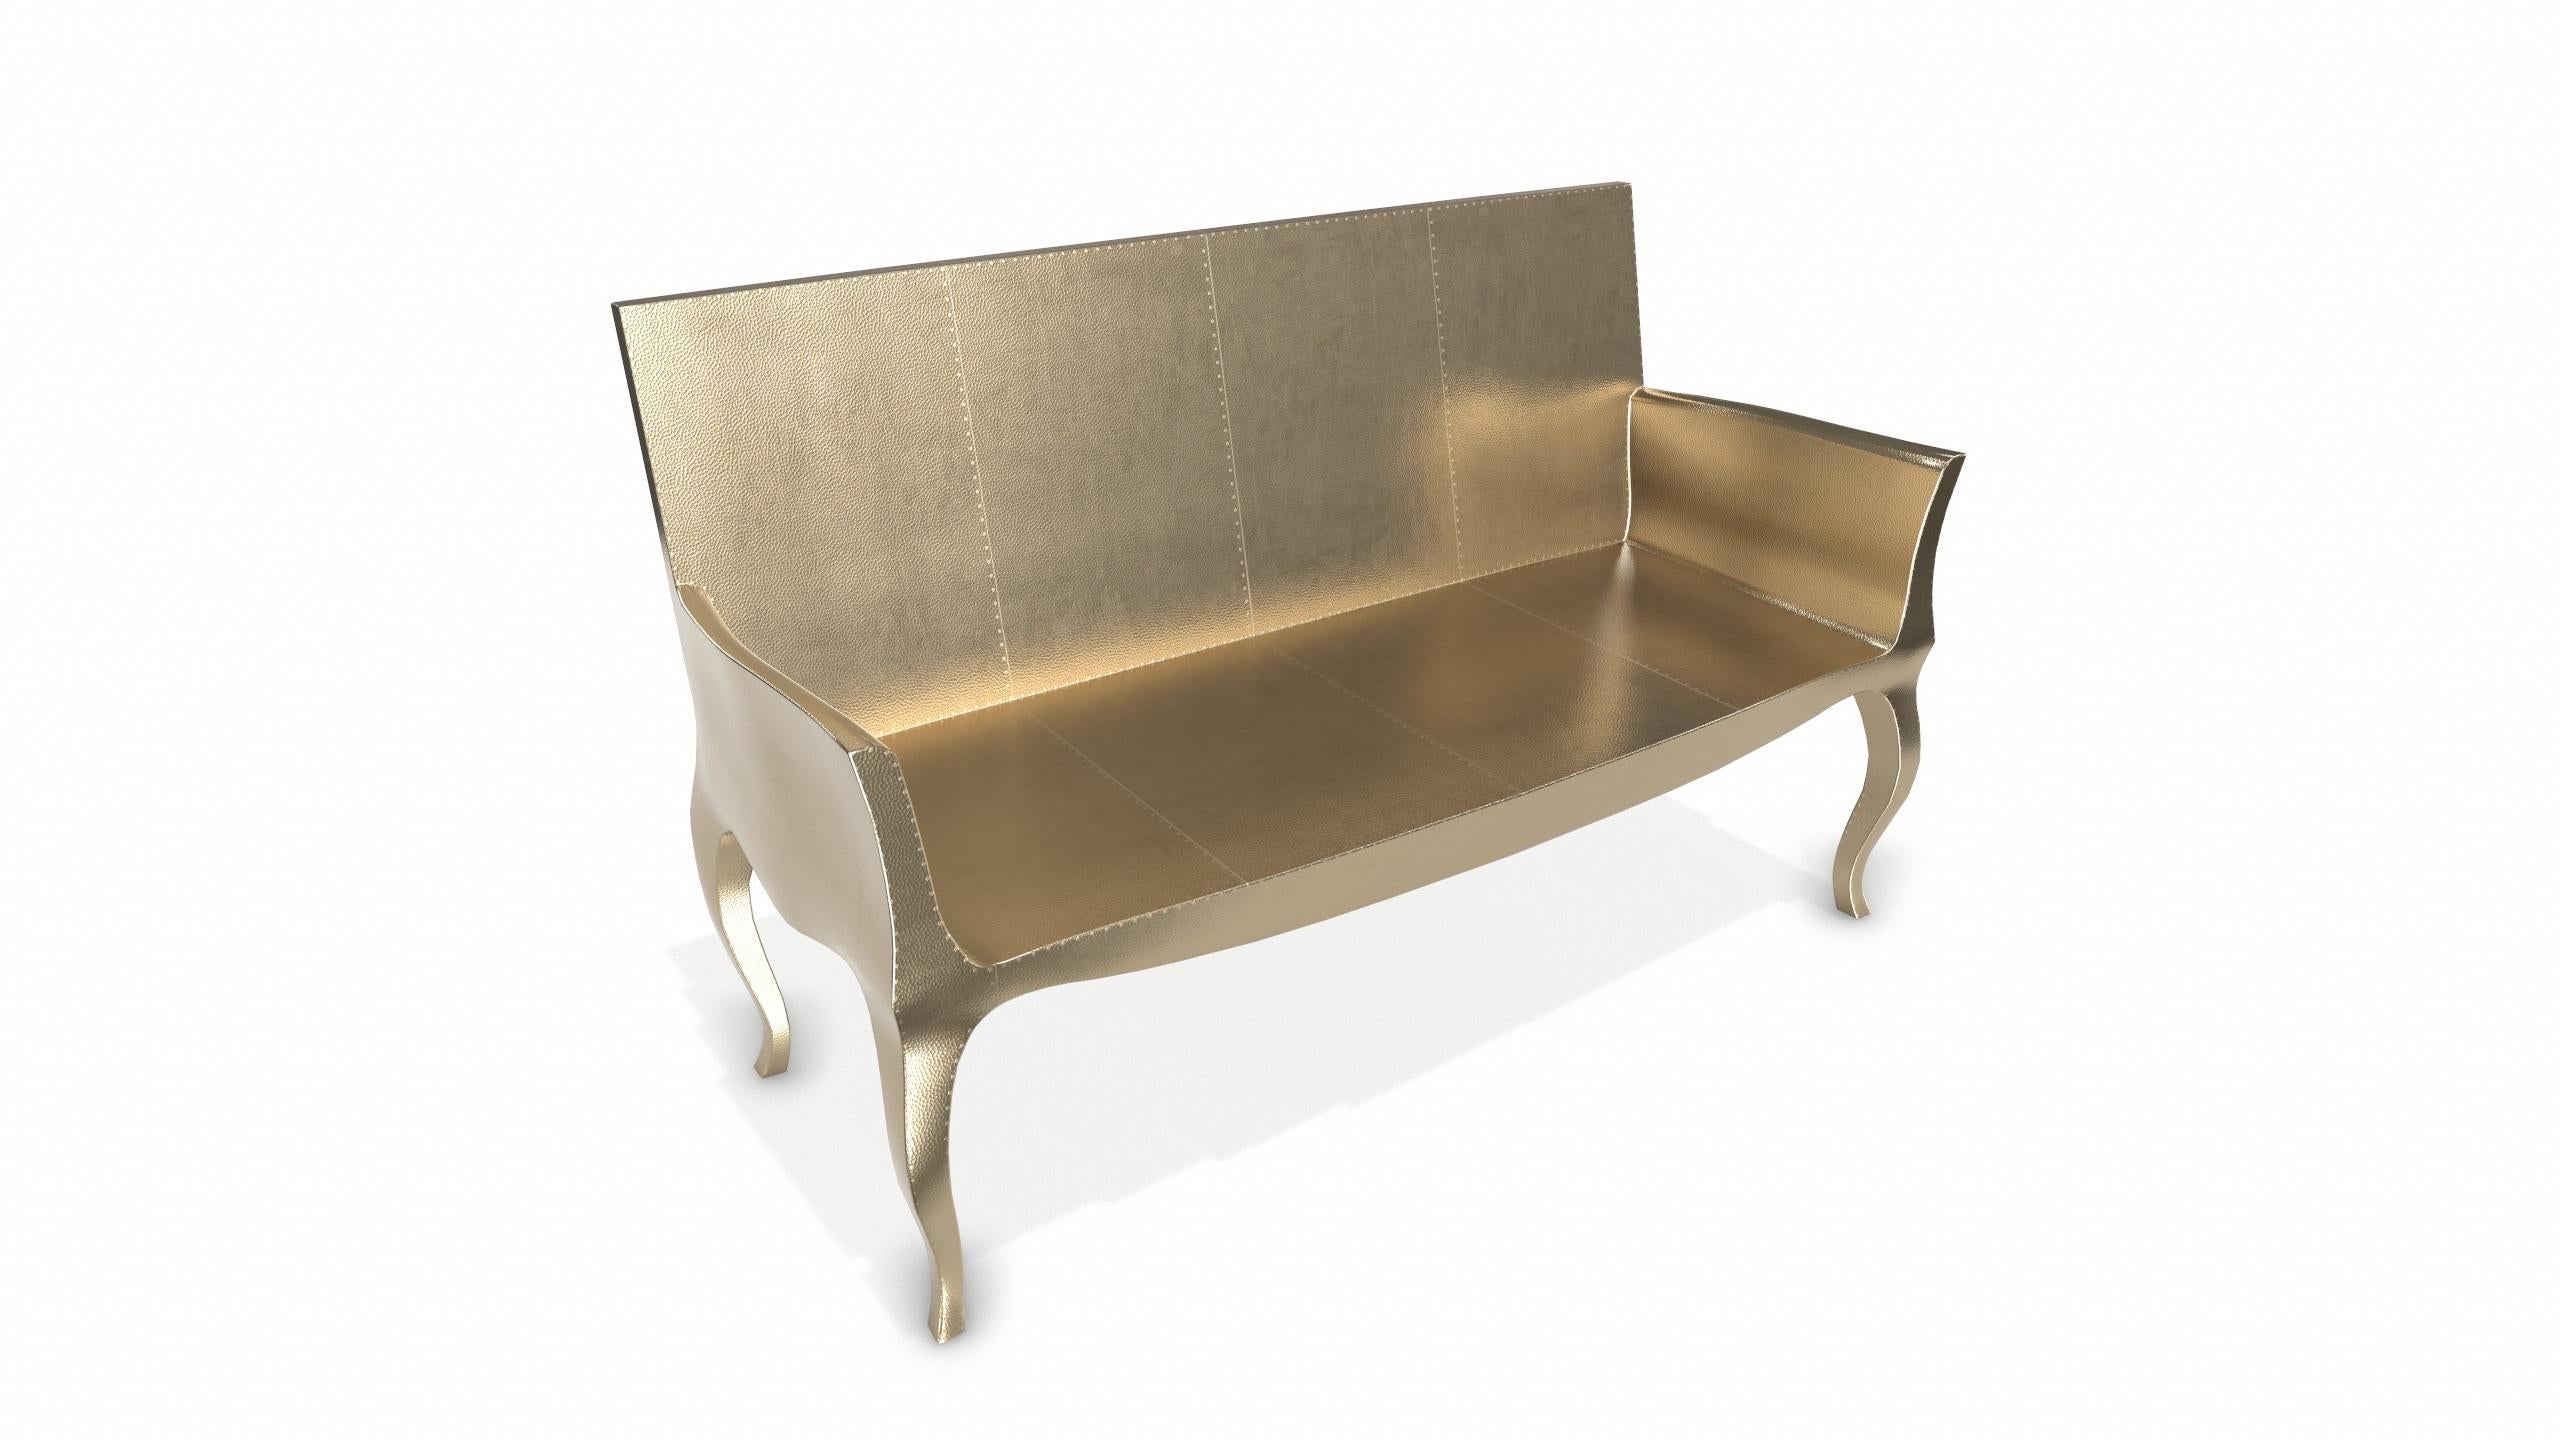 Louise Settee Art Deco Canapes in Mid. Hammered Brass by Paul Mathieu For Sale 2